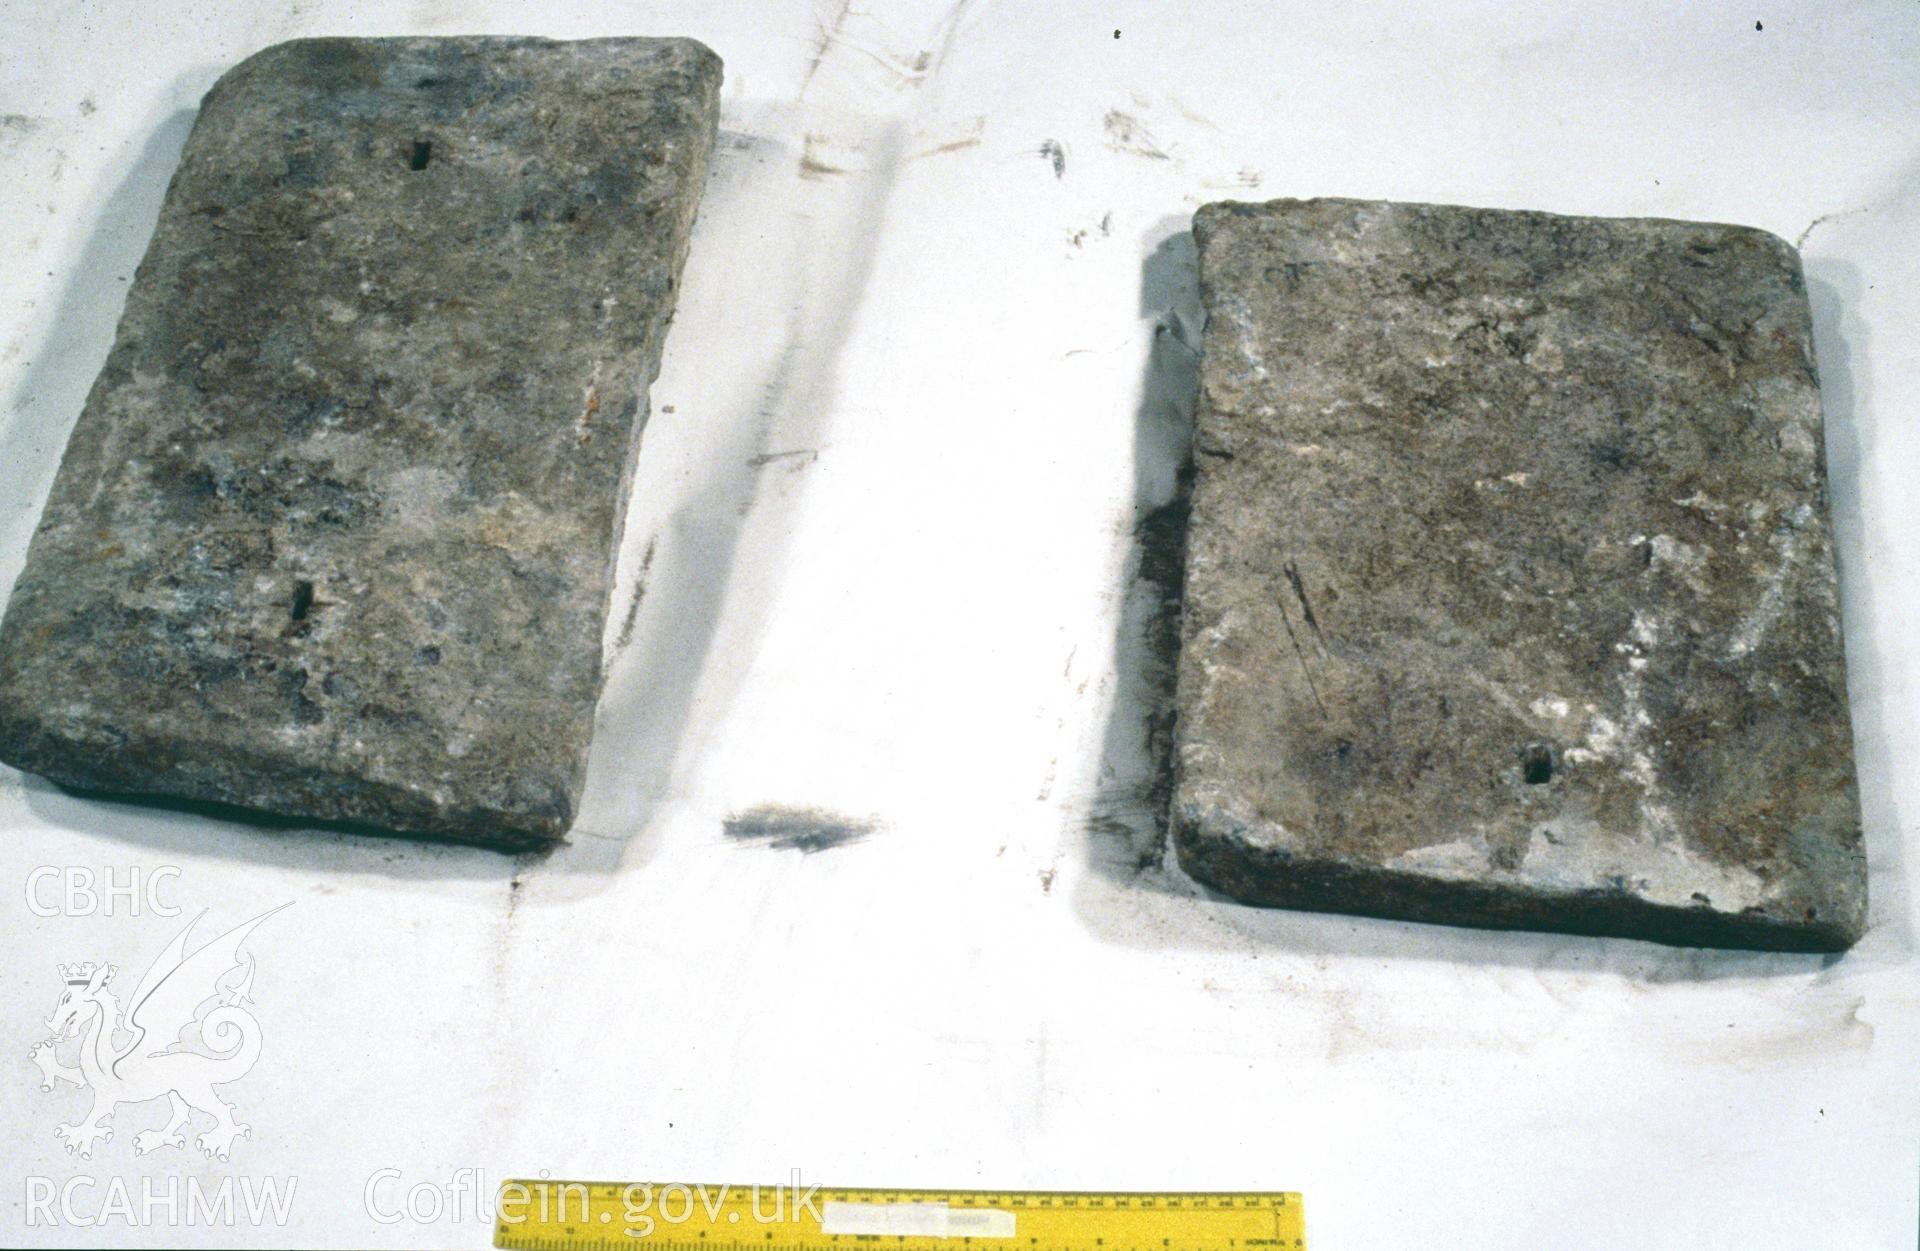 Colour slide showing find from site, lead ingots from ballast, from a survey of the Mary designated shipwreck, courtesy of National Museums, Liverpool (Merseyside Maritime Museum)